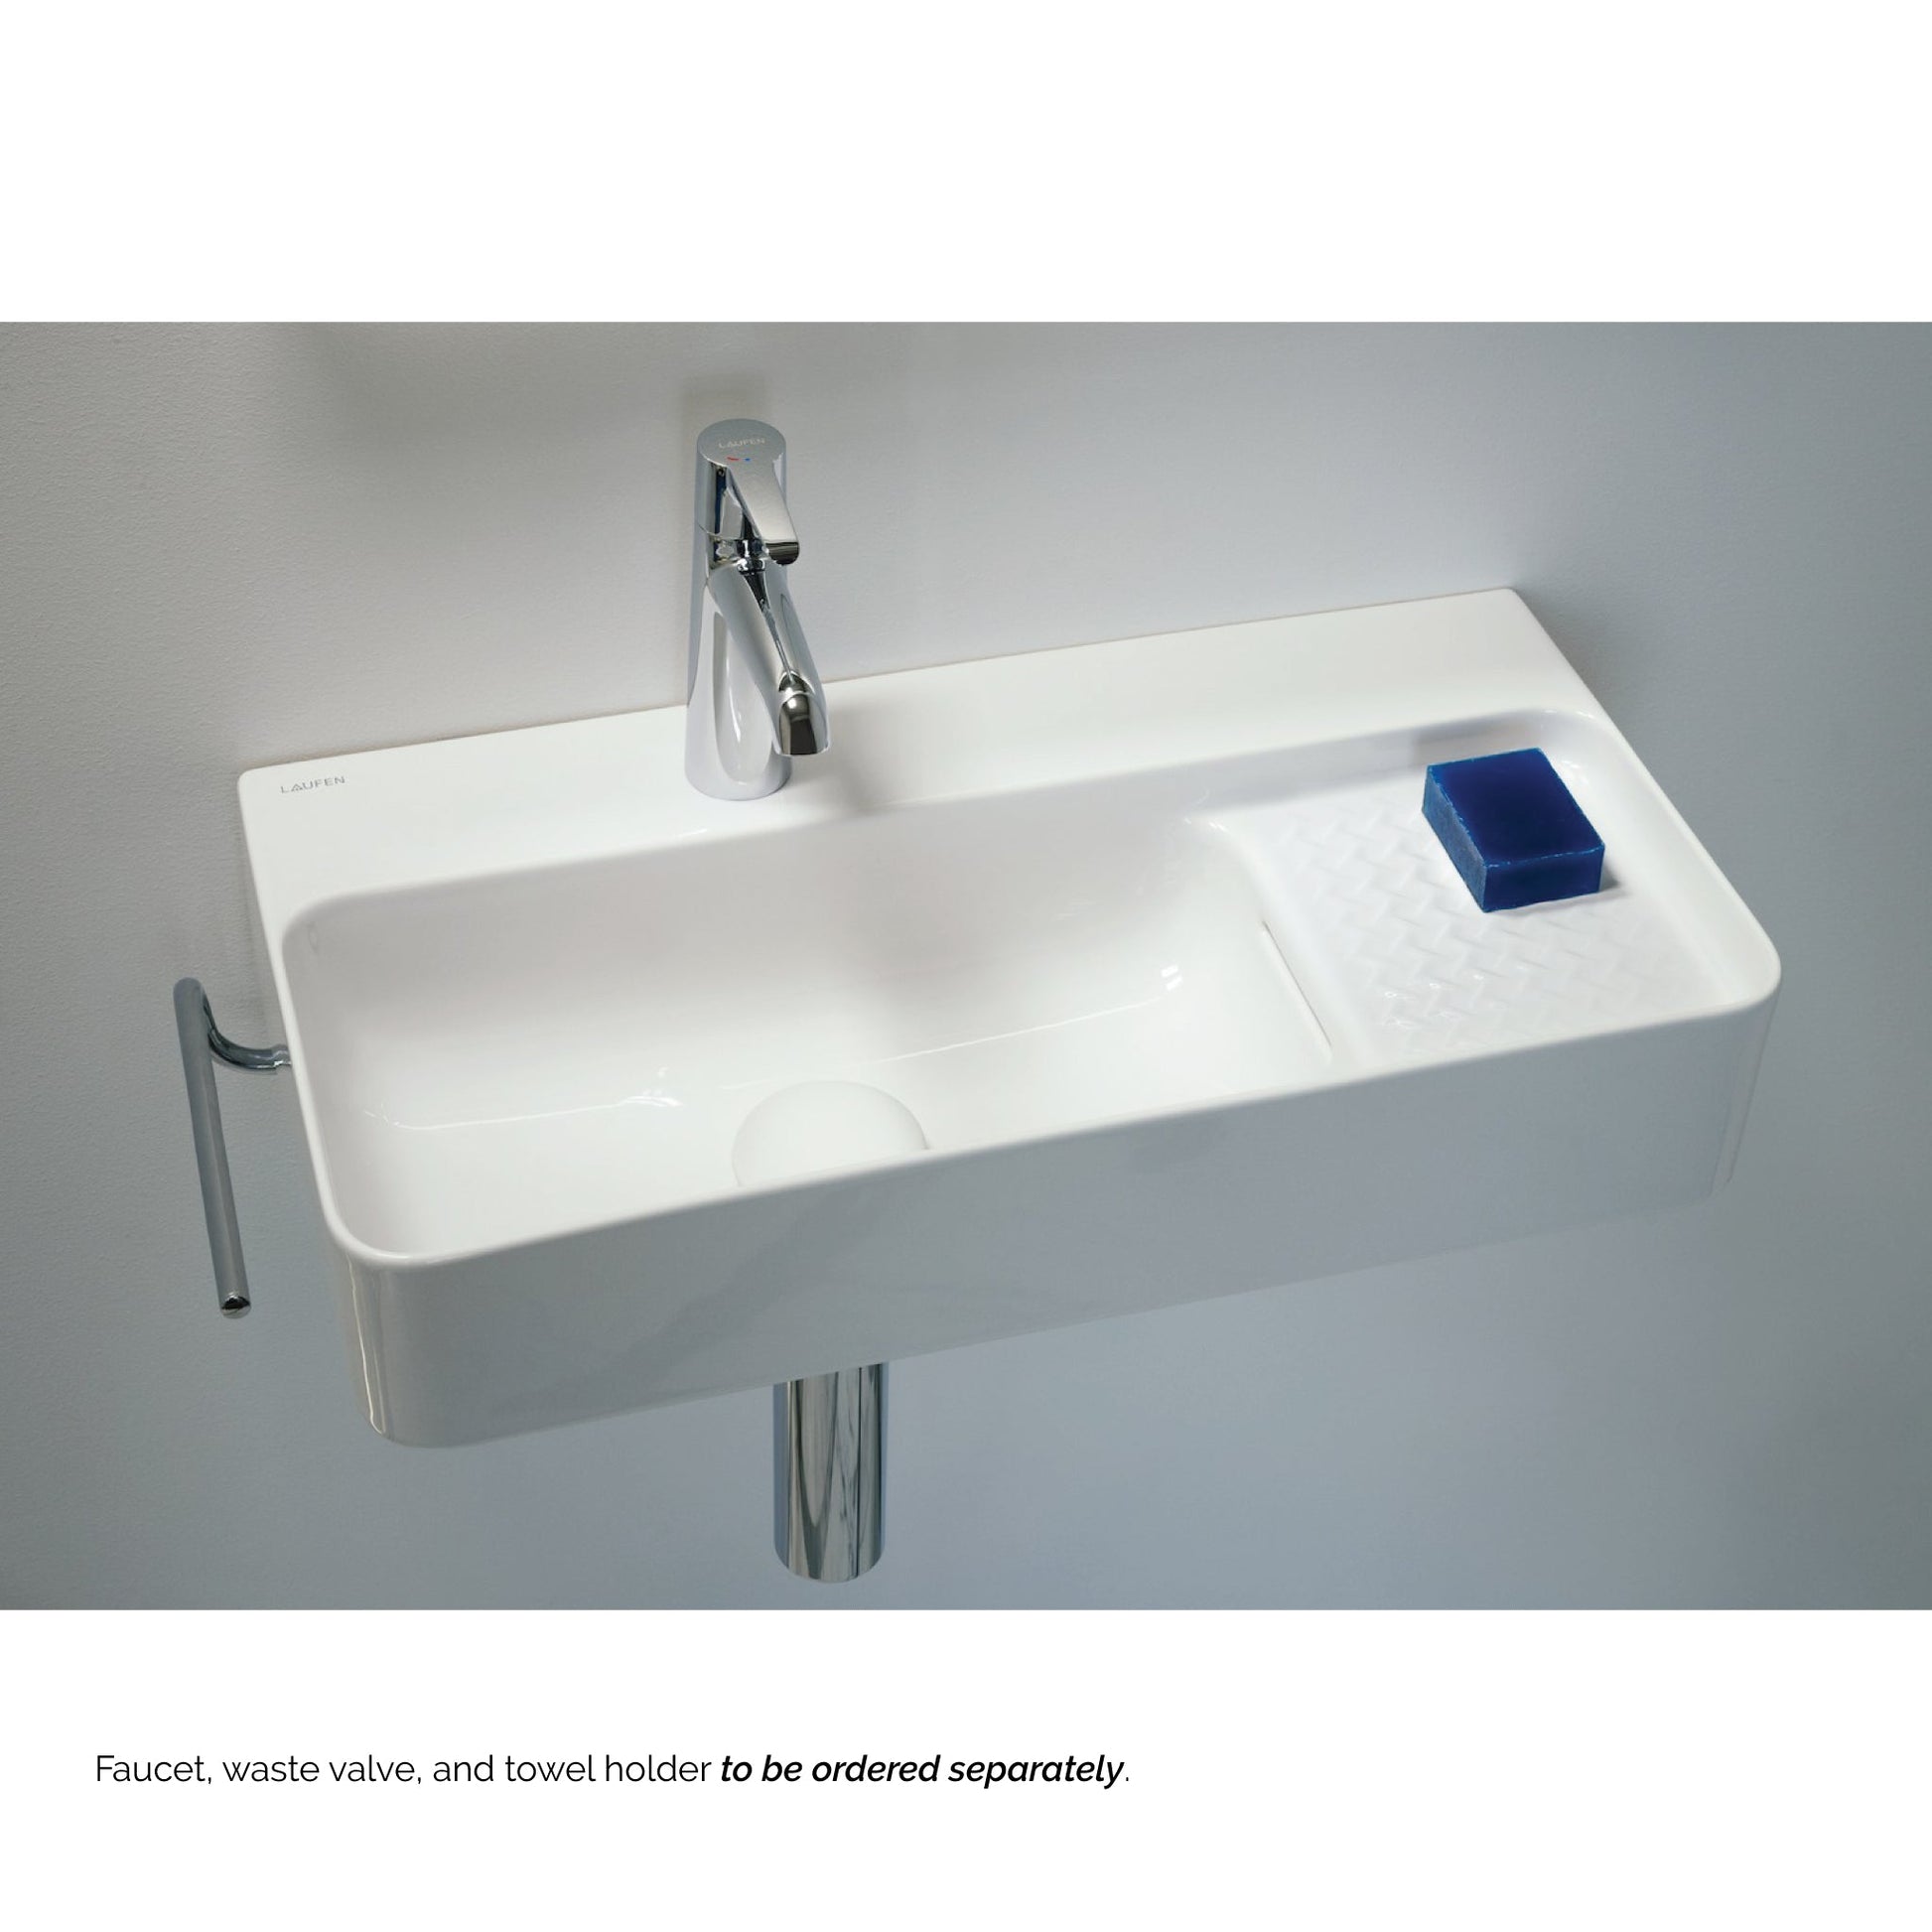 Laufen Val 24" x 12" Rectangular White Wall-Mounted Bathroom Sink With Faucet Hole